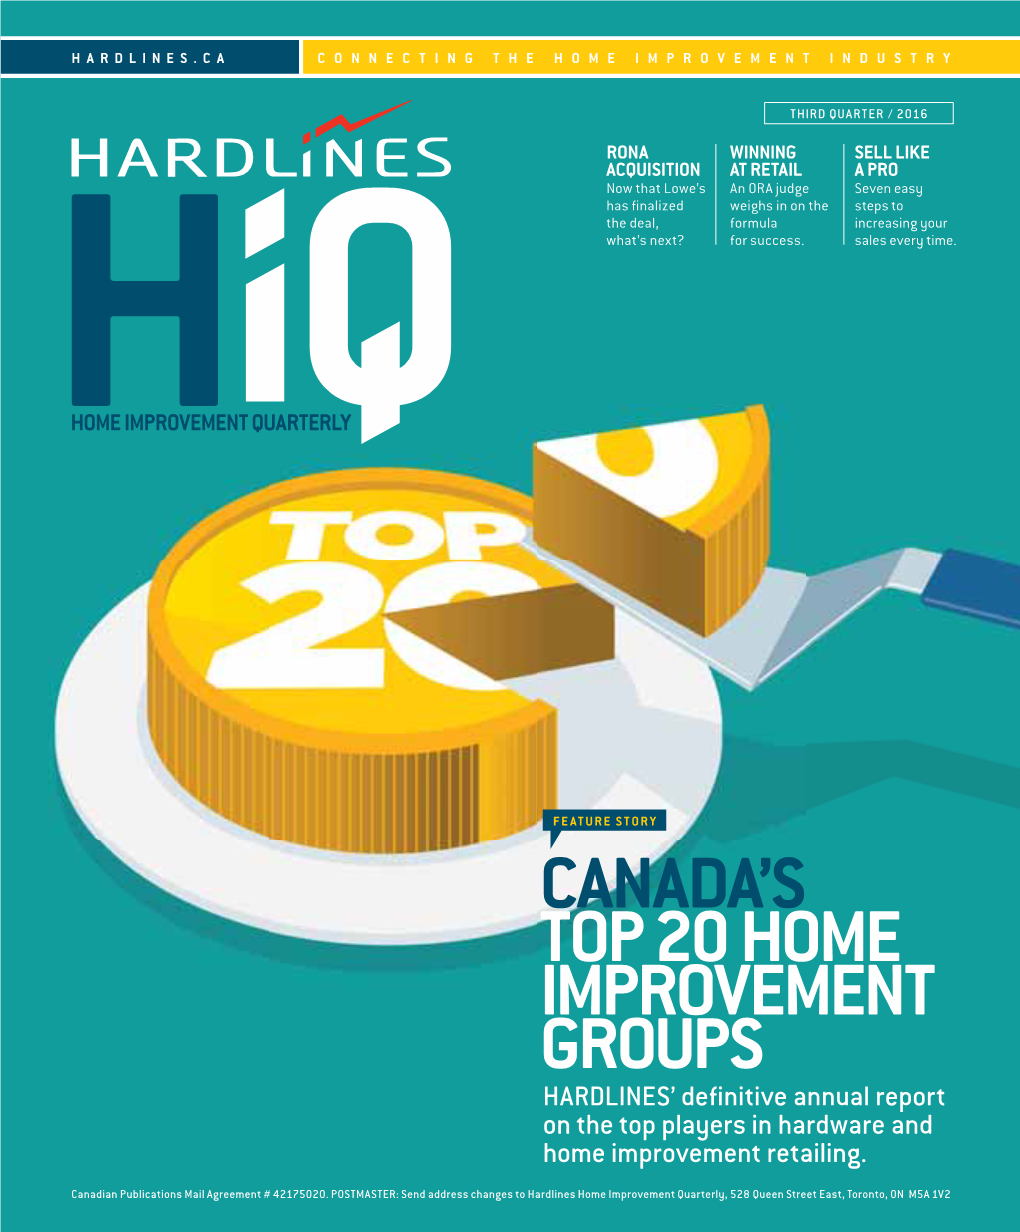 Canada's Top 20 Home Improvement Groups